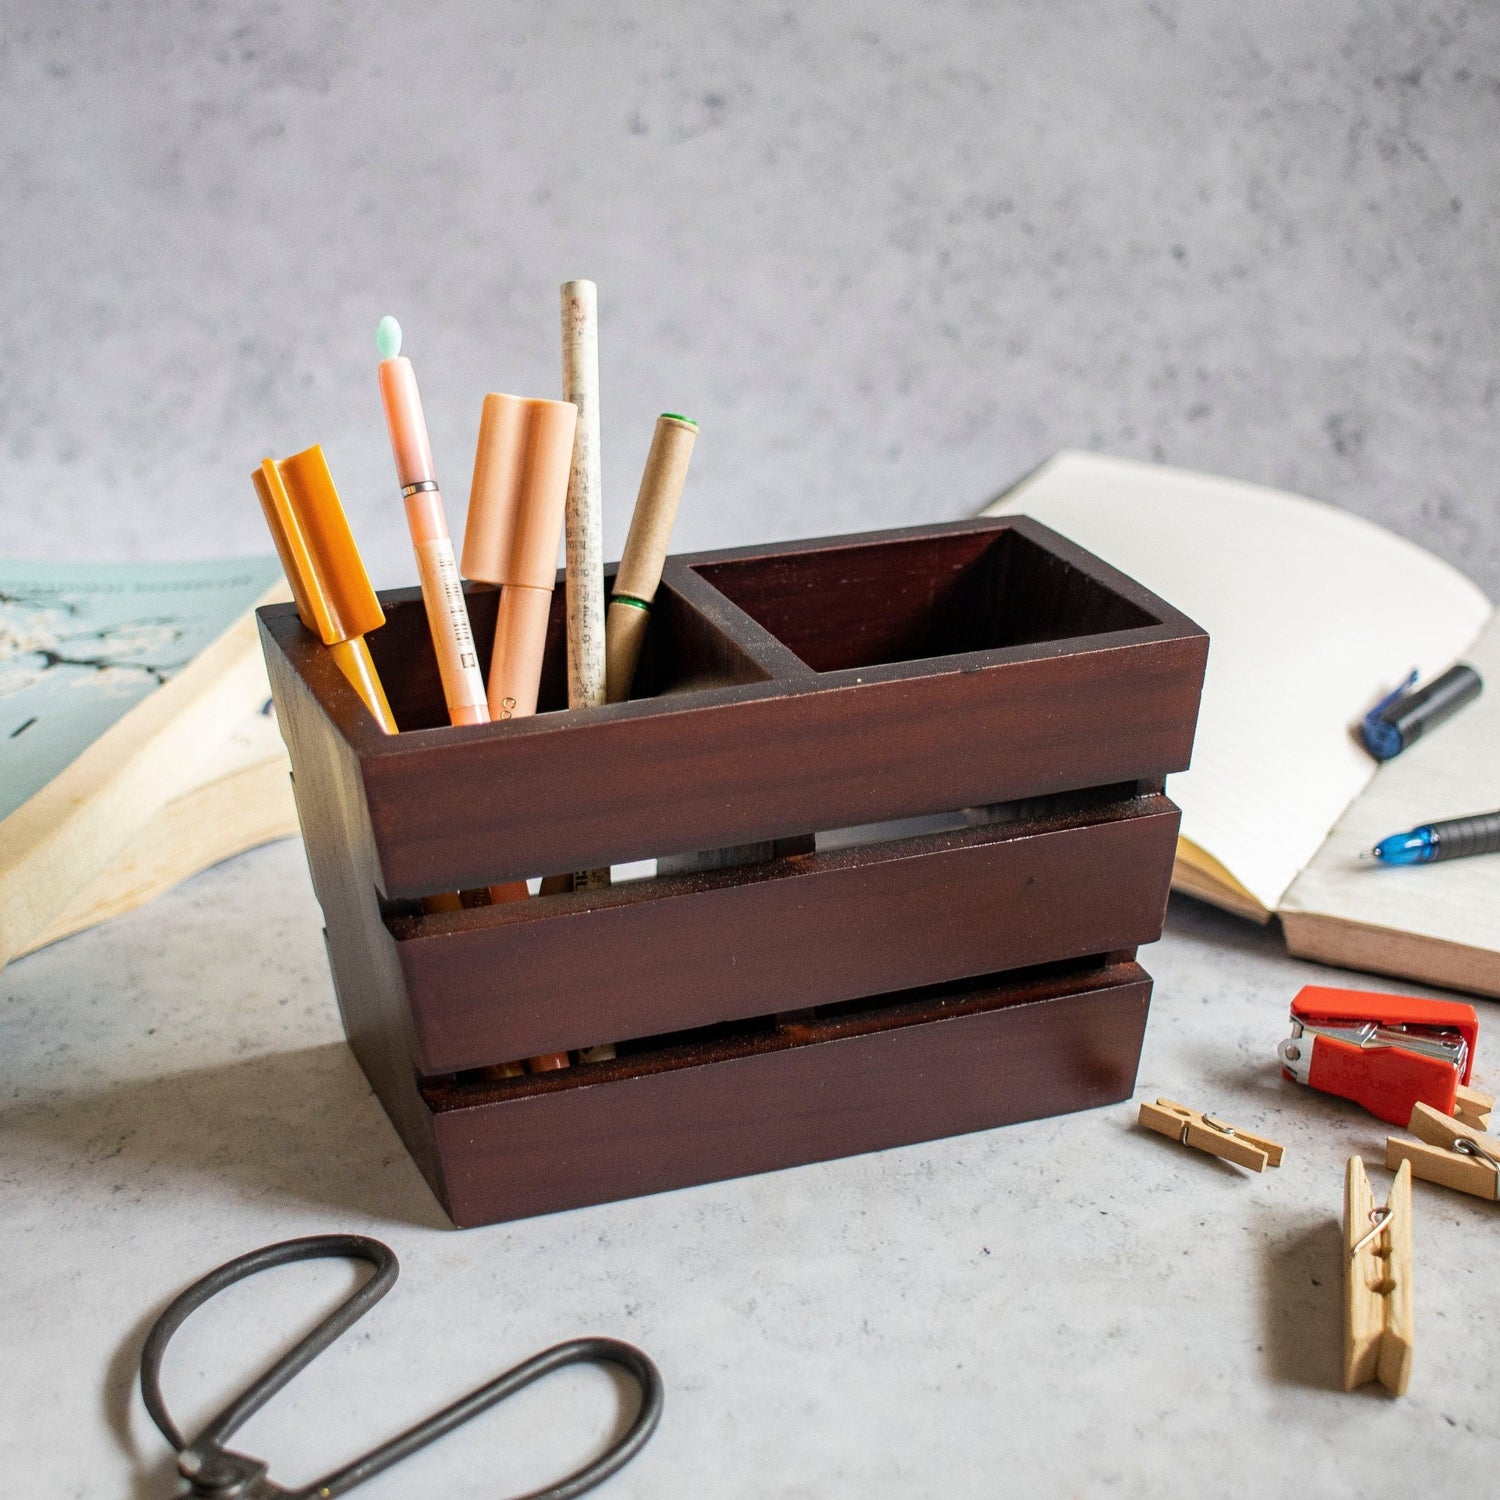 Products For Your Study | Utility Products for your Study Room - Ebony Woodcrafts